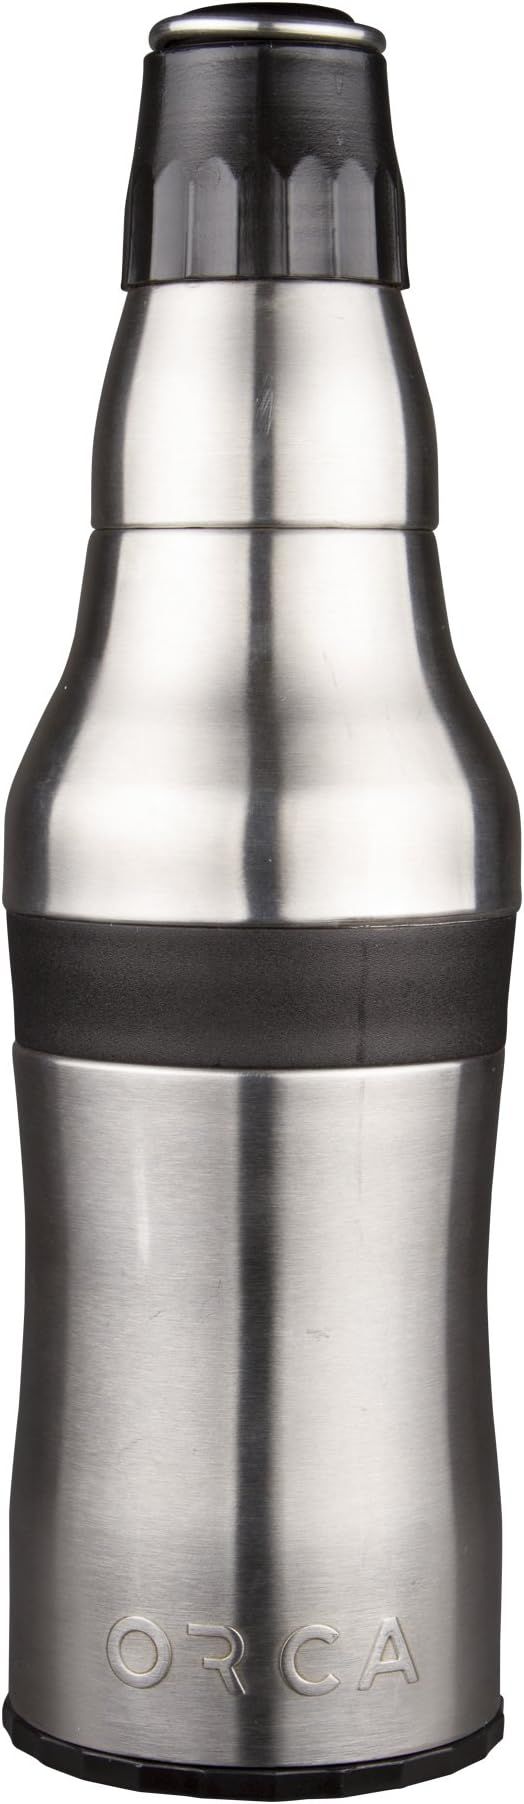 ORCA Rocket Bottle Cup and Can Holder ORCROCK Stainless Steel | Amazon (US)